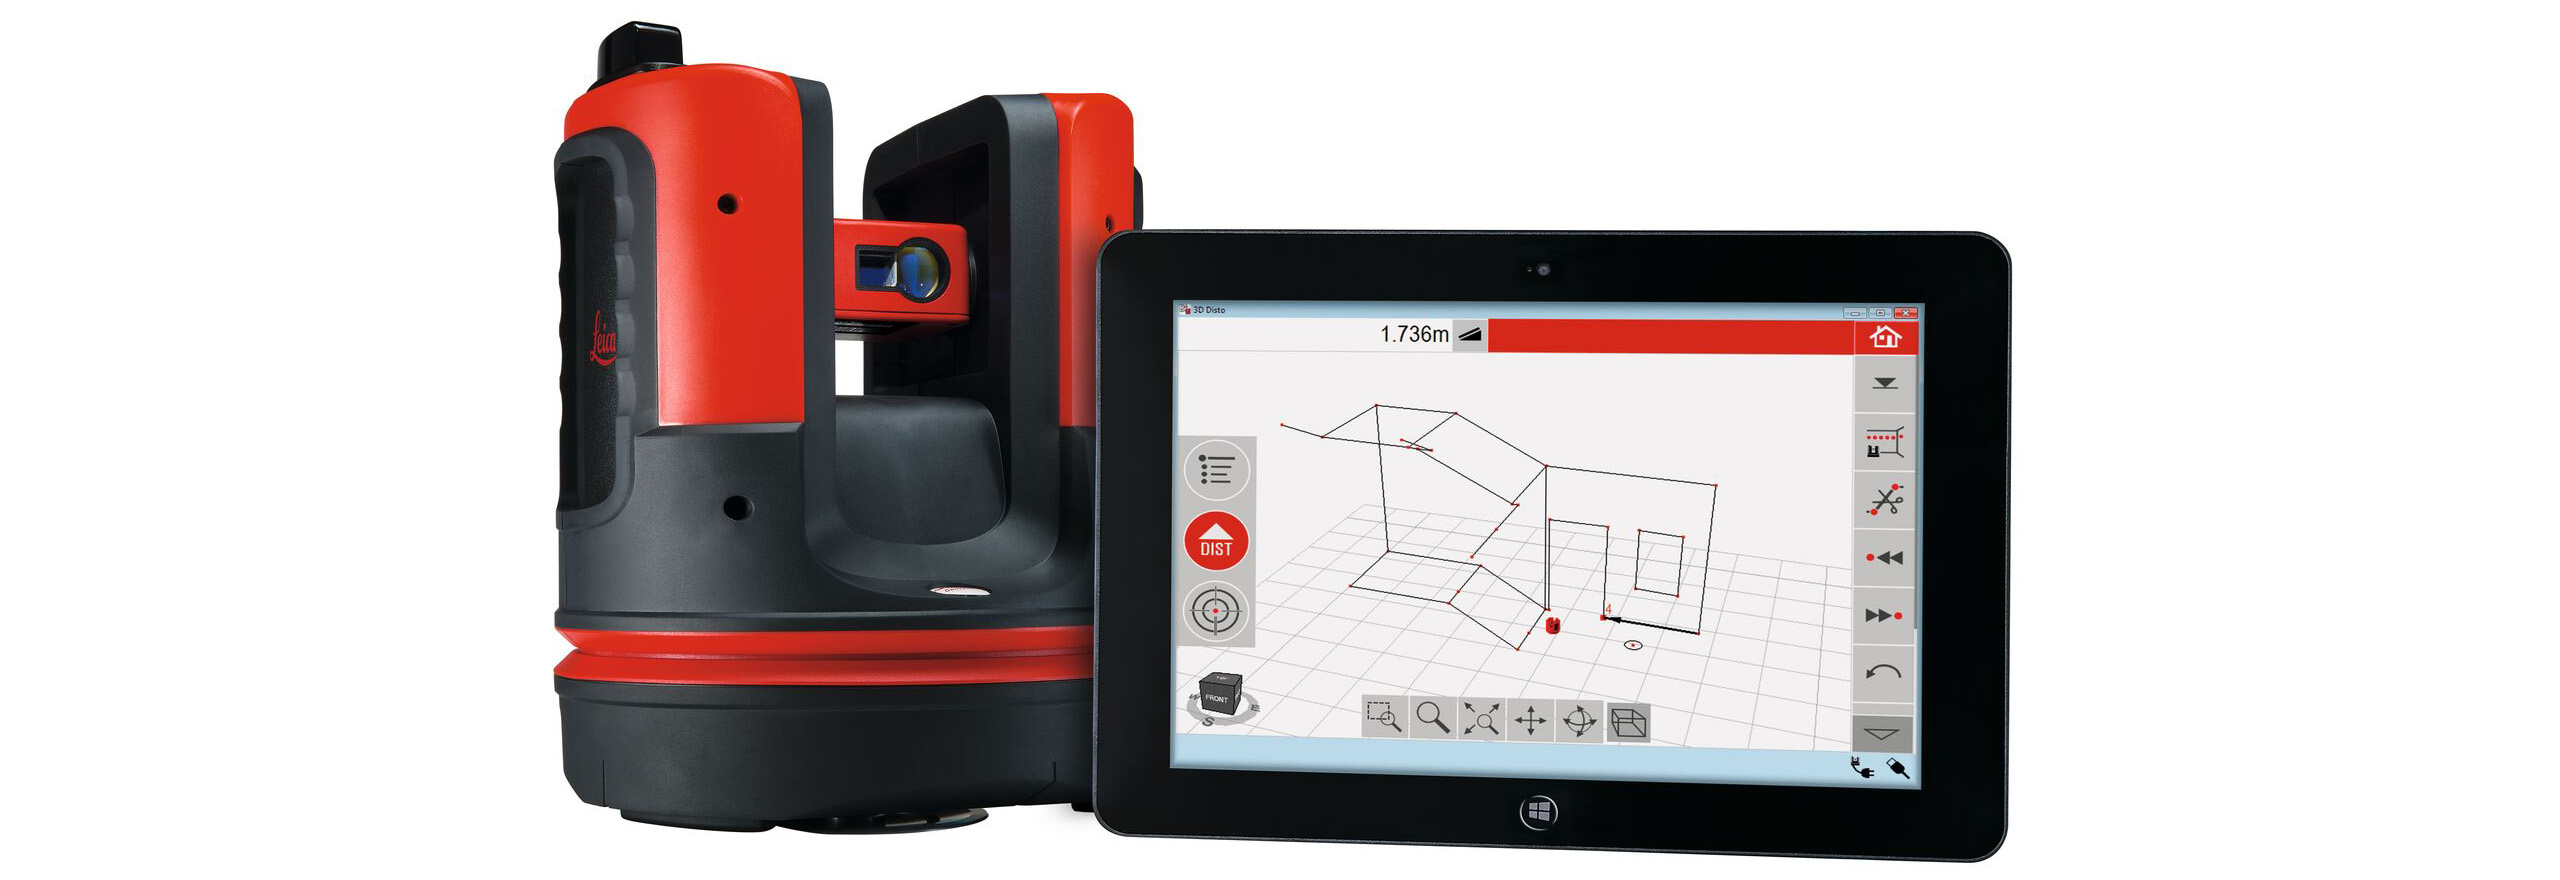 Leica 3D DISTO™ is ideal for measuring, templating and layout applications in wood, stone, glass and metal. Measure in 3D and send DXF files directly to CNC machines for a fast, accurate and perfect fit. If your work involves off-site cutting and processing of costly materials using as-built templates, learn about the Leica 3D DISTO.